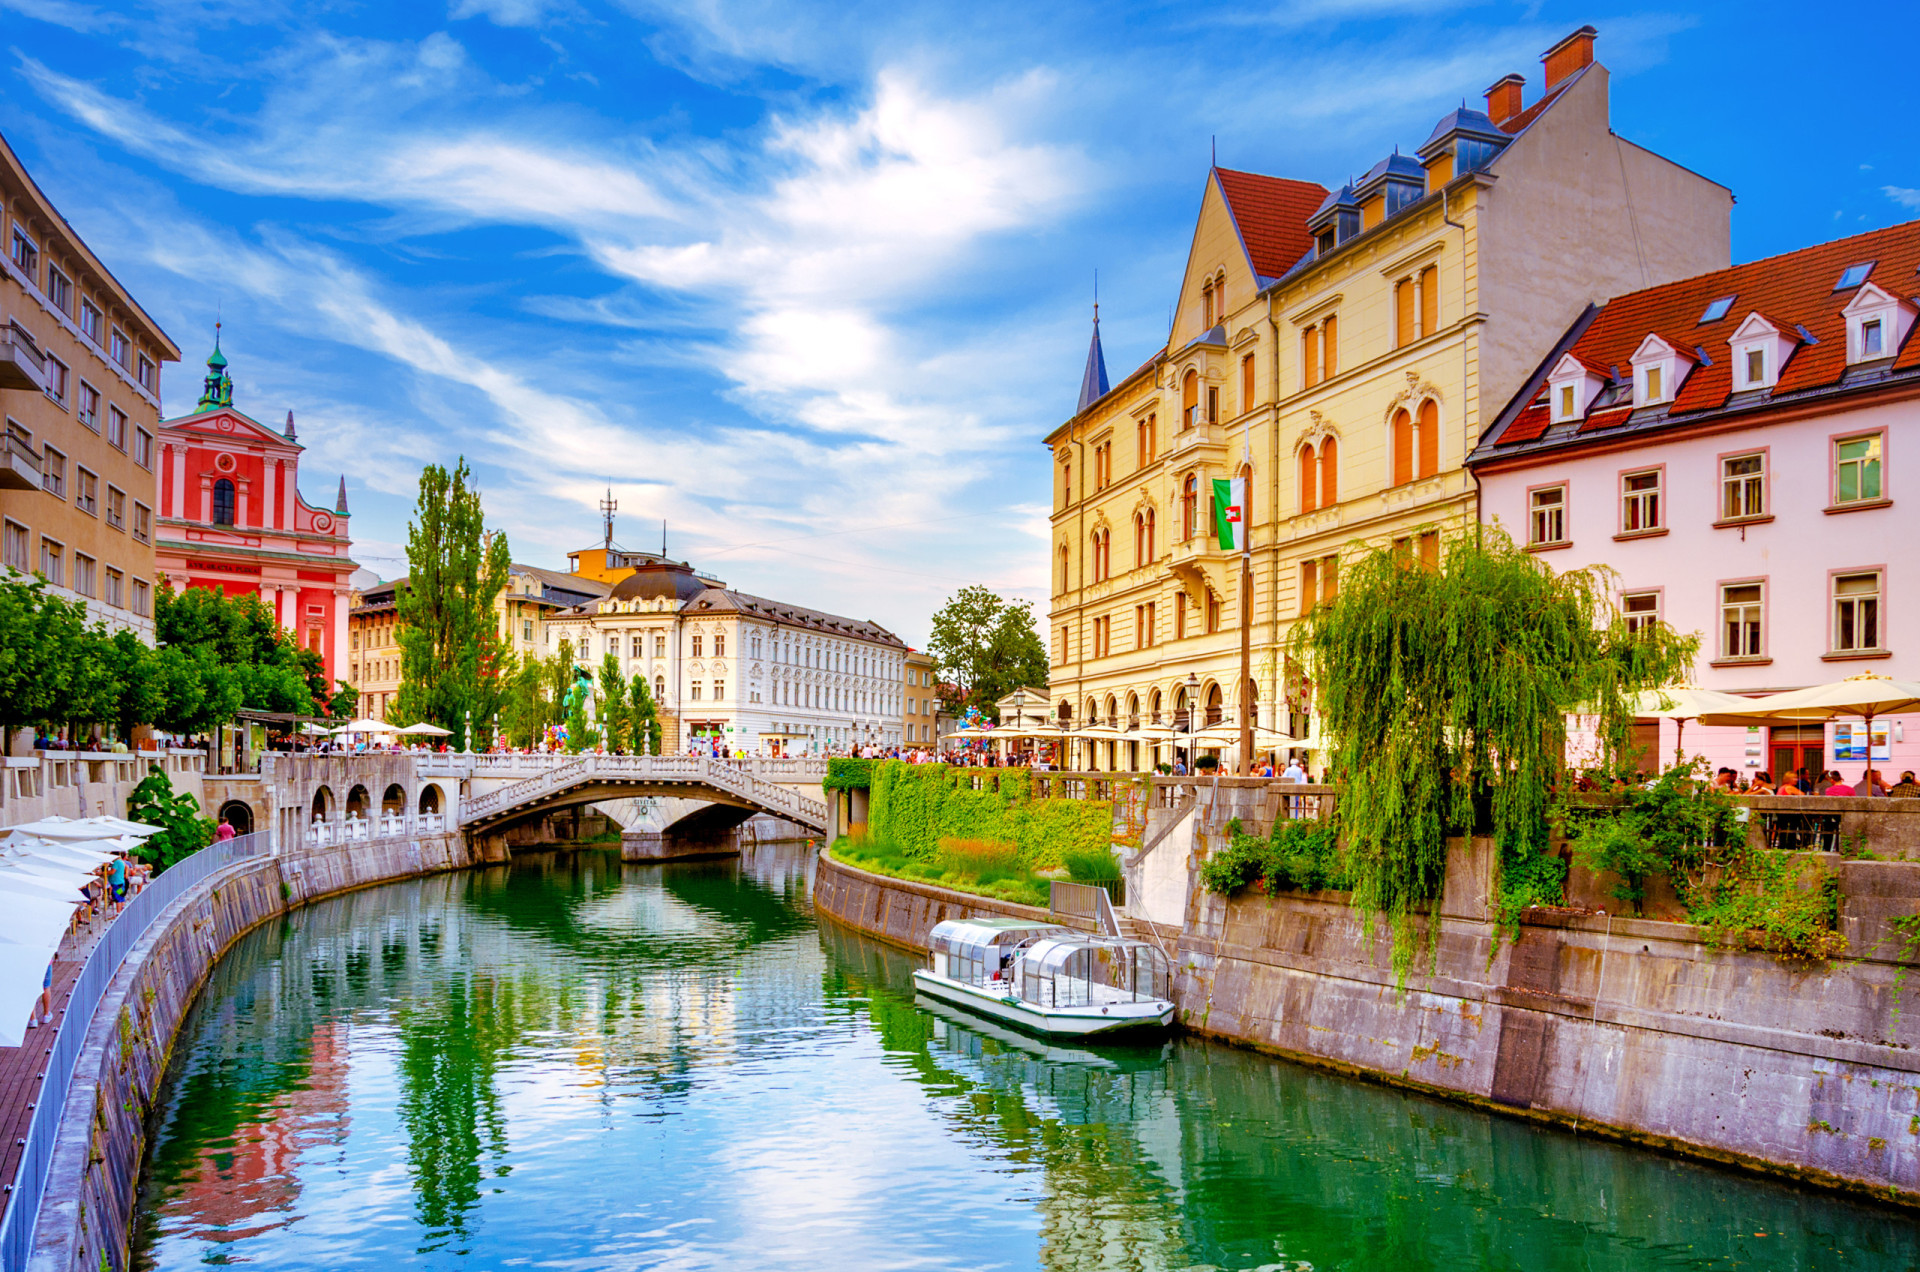 <p>Slovenia bases its tax on location and hotel rating. In larger cities and resorts, such as Ljubljana and Bled, the fee is higher and only around €3 (US$3.40) per night.</p><p>You may also like:<a href="https://www.starsinsider.com/n/438306?utm_source=msn.com&utm_medium=display&utm_campaign=referral_description&utm_content=683481en-my"> Amber Tamblyn, David Cross share how couples therapy helped both on- and off-screen</a></p>